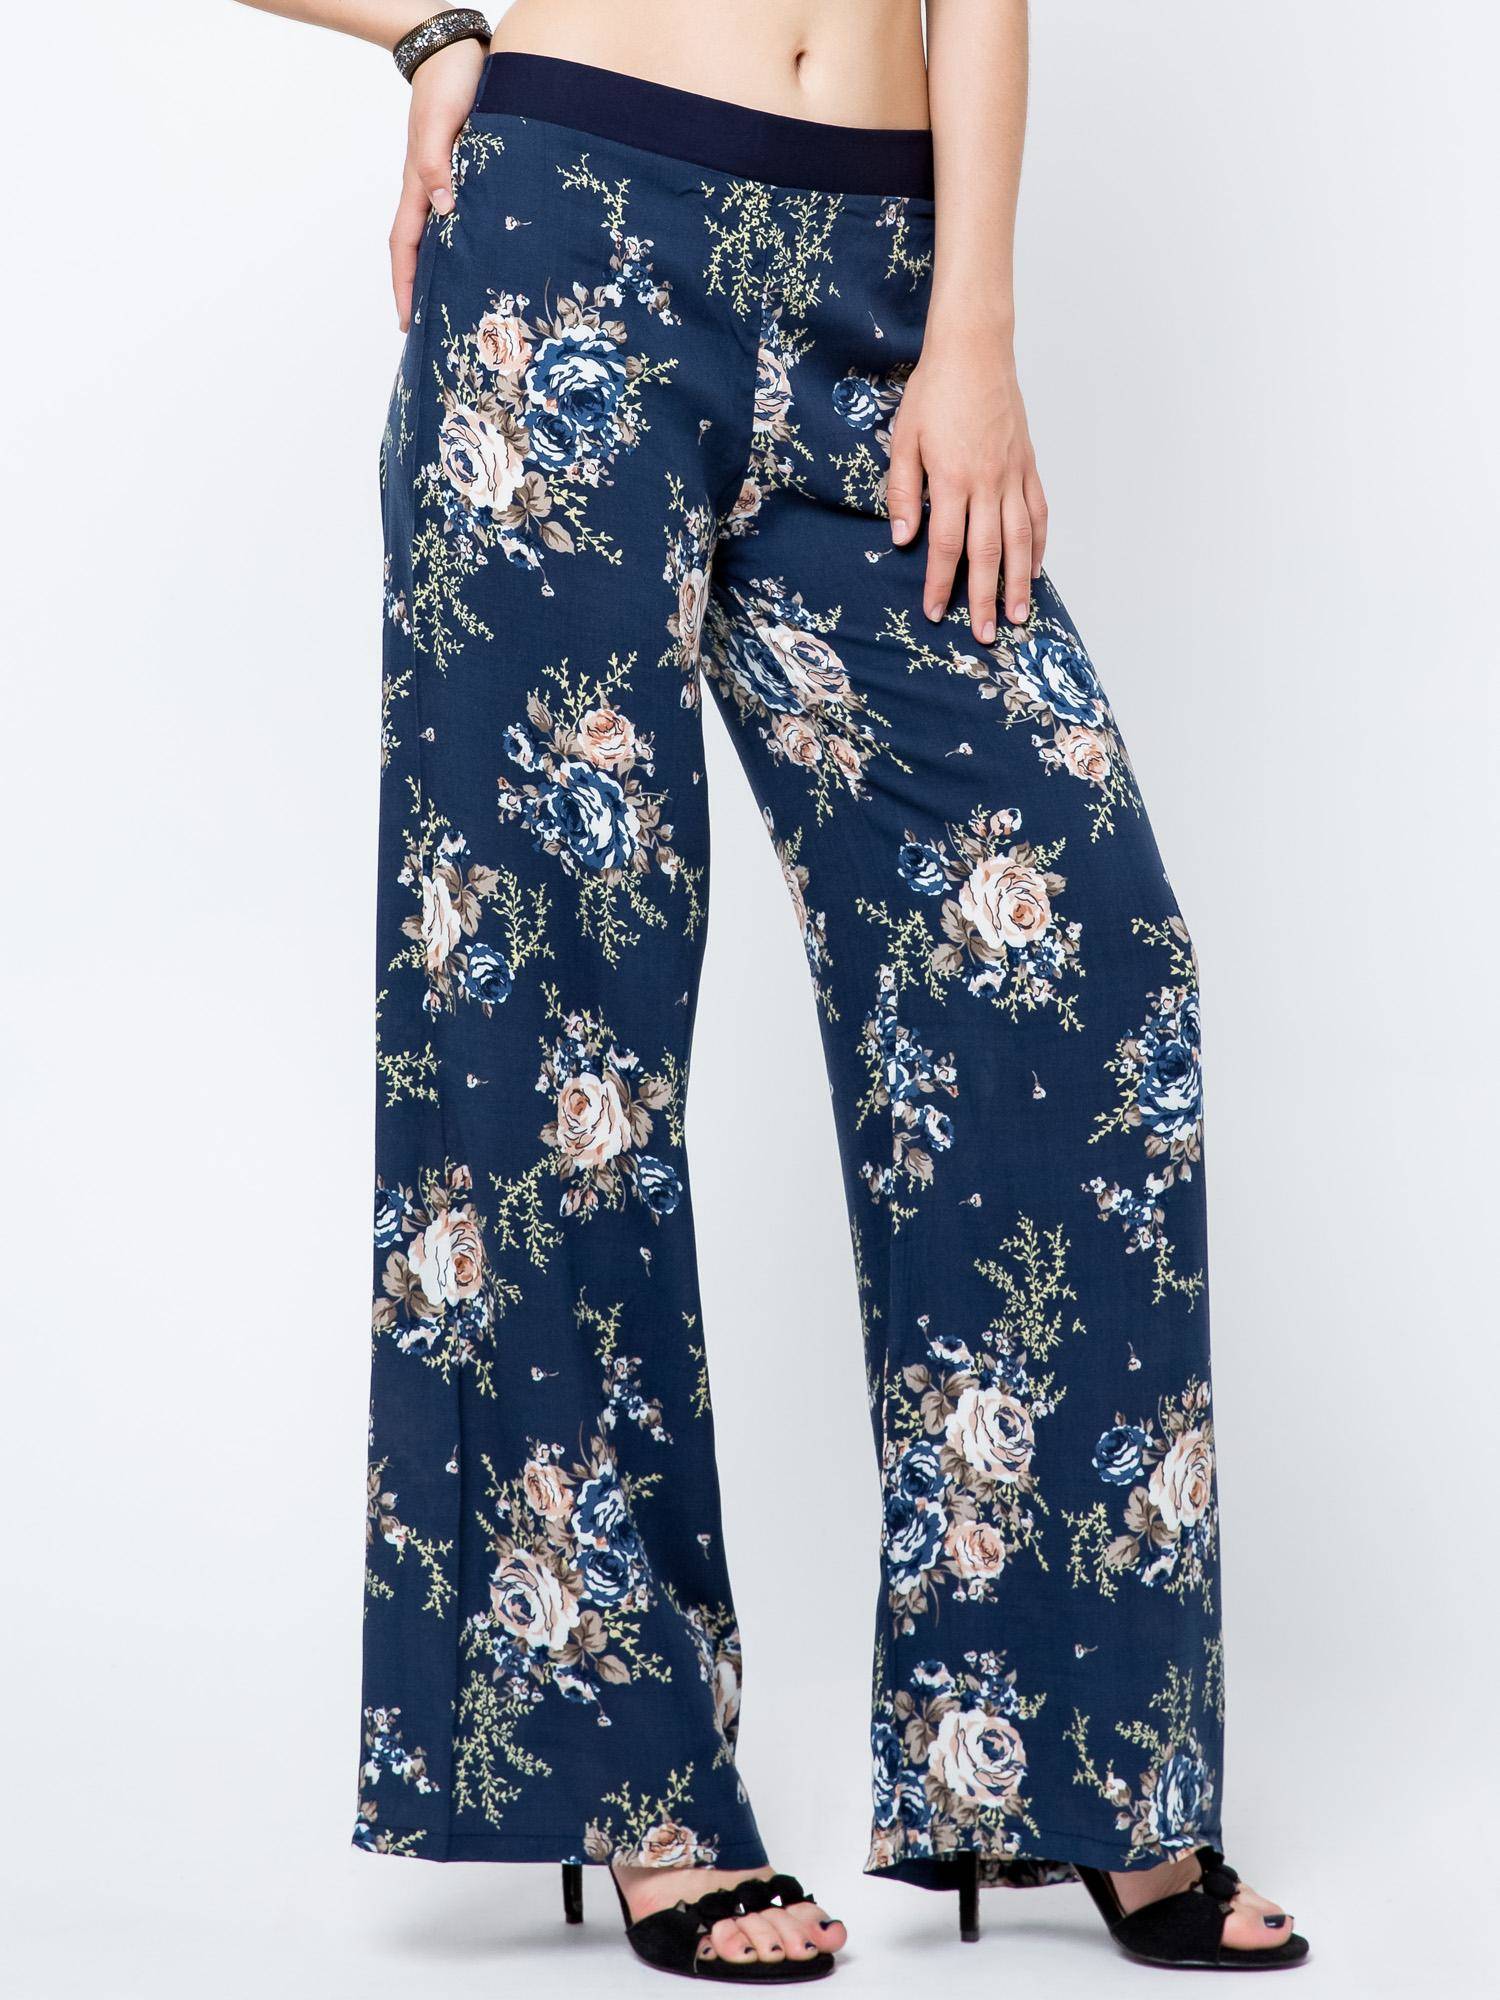 Levně Swedish trousers decorated with a print in navy blue roses